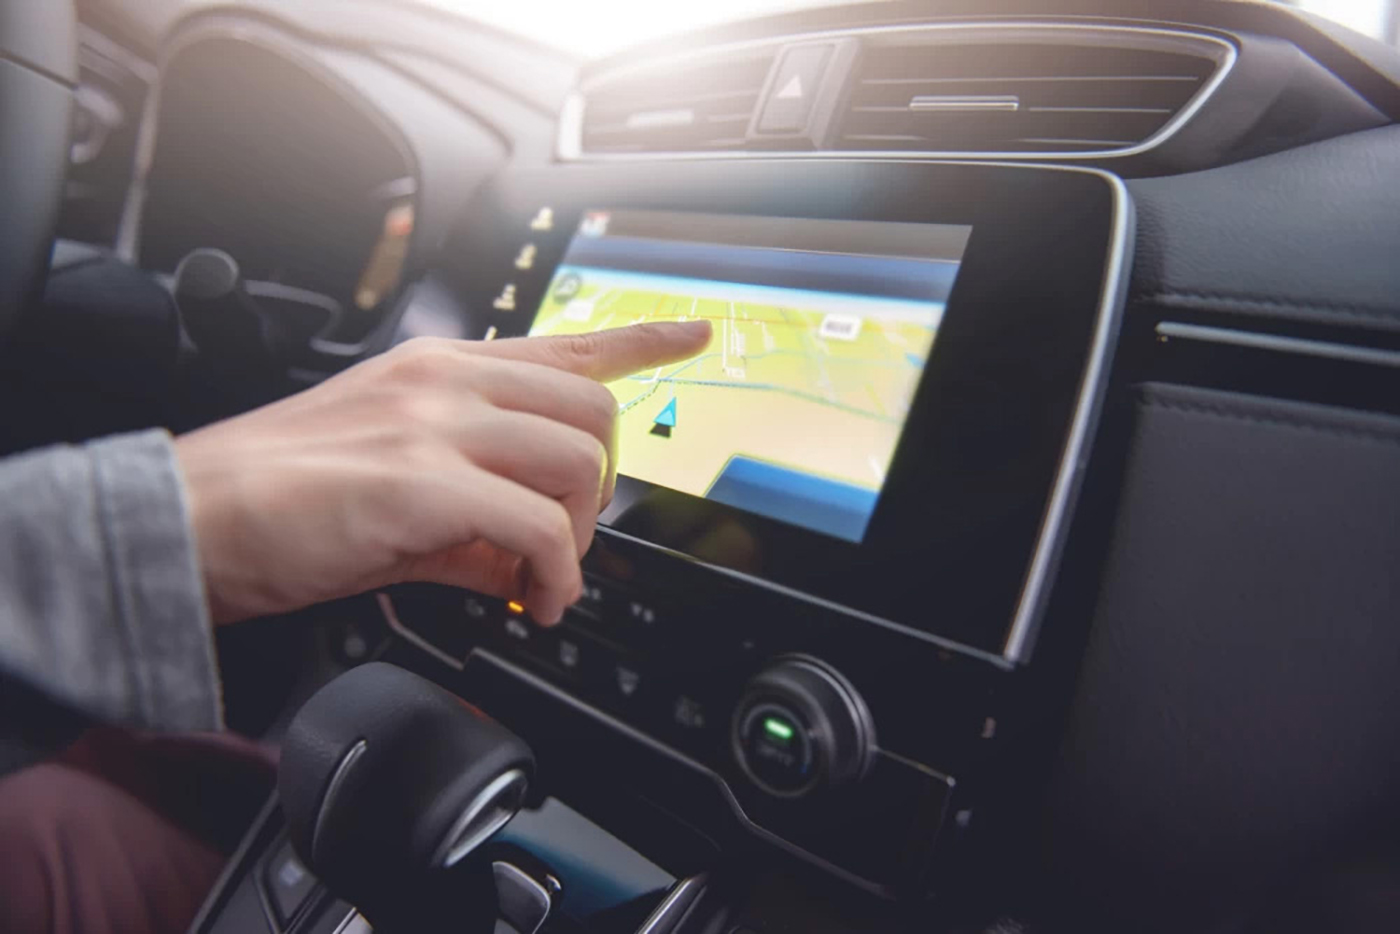 A person's hand with their pointer finger on the gps touch screen on the car dashboard.